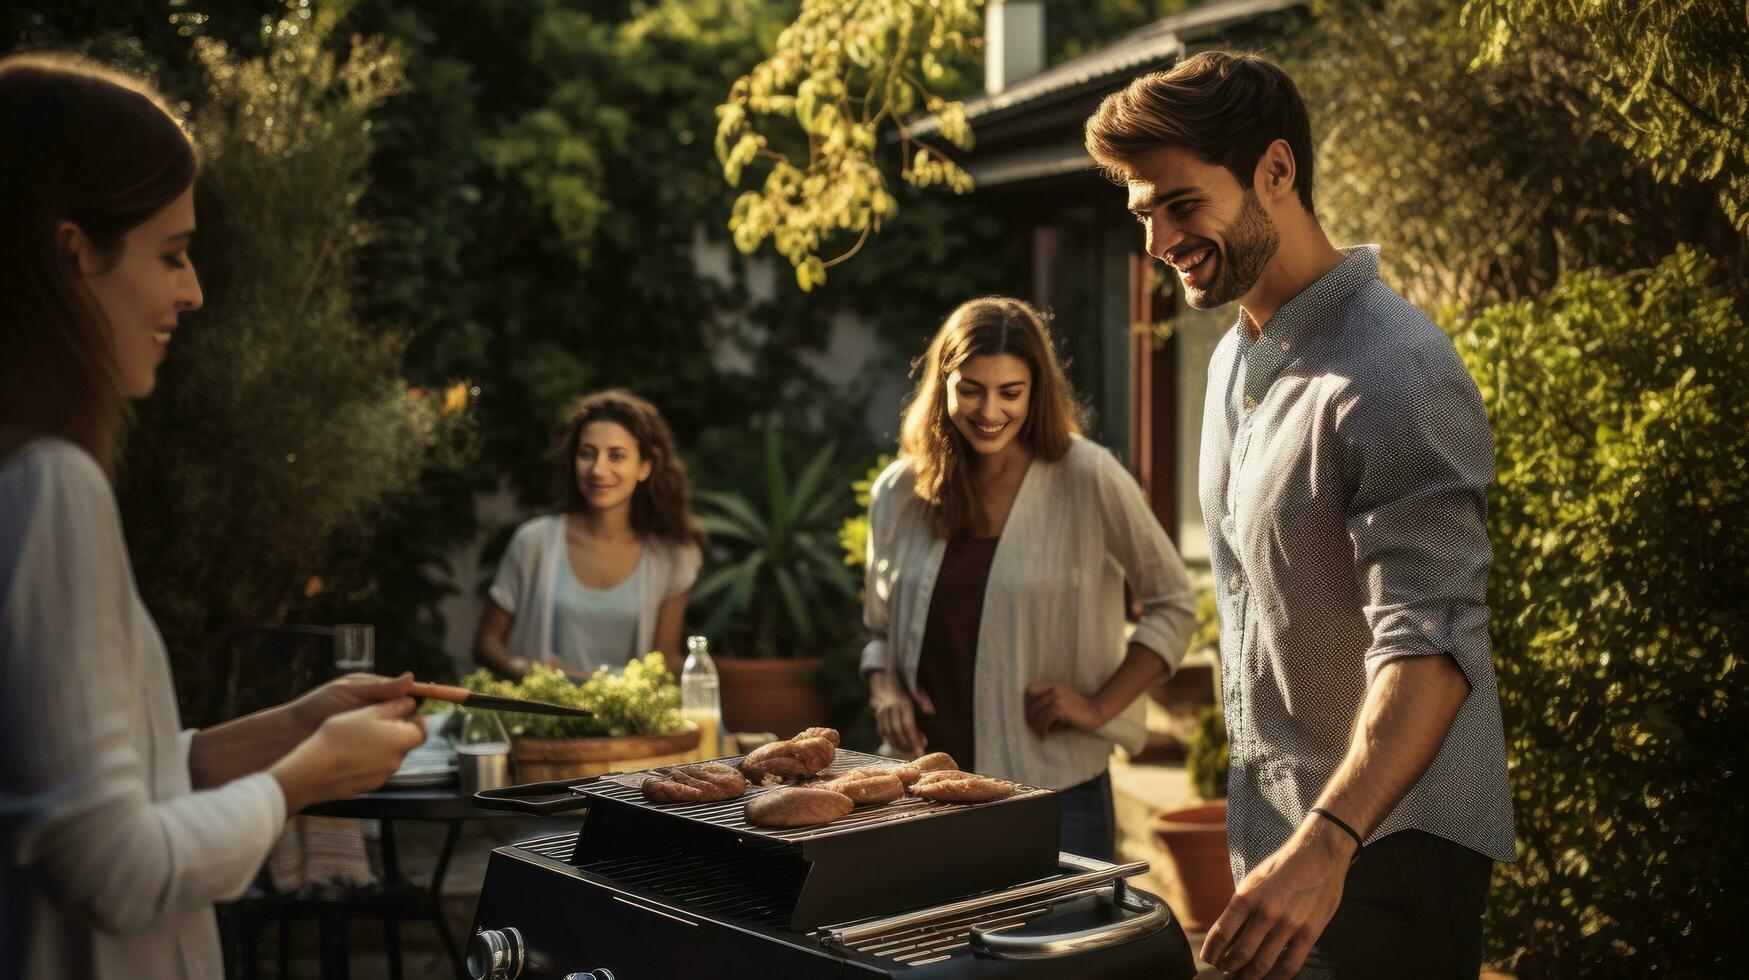 Young family is grilling at the barbecue photo